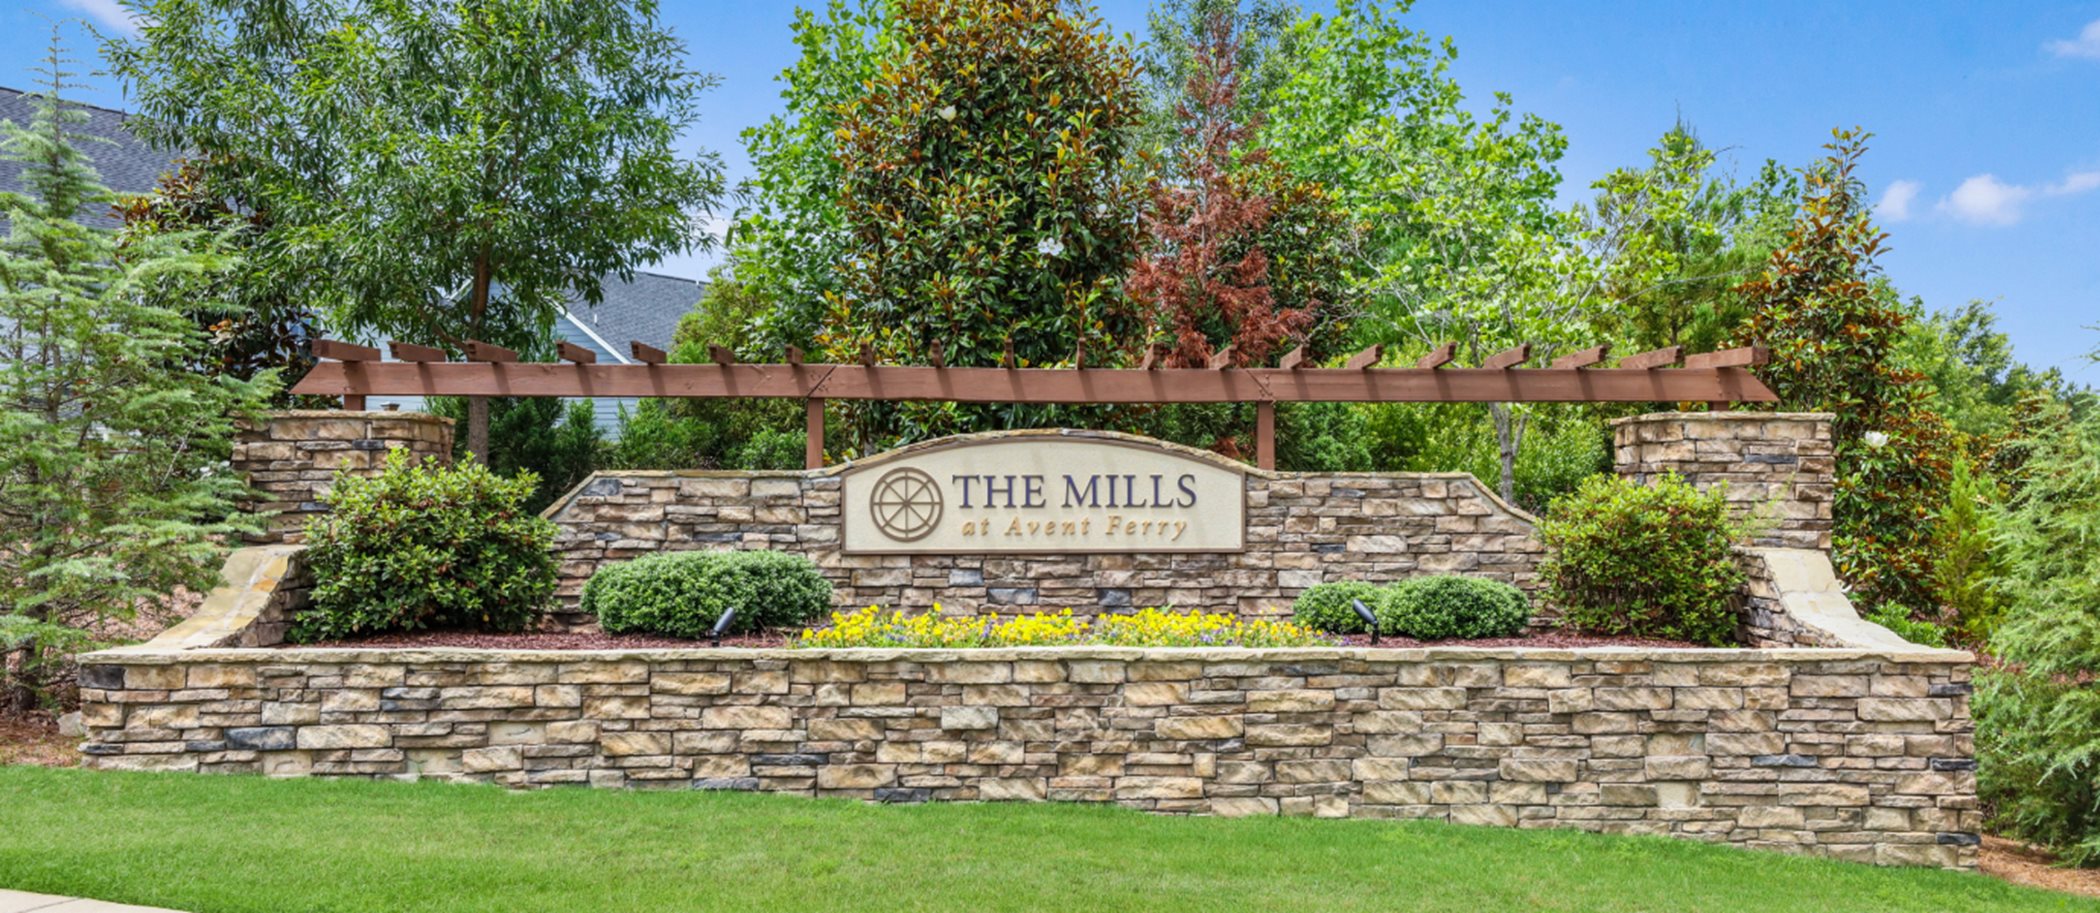 Welcome to the Mills at Avent Ferry